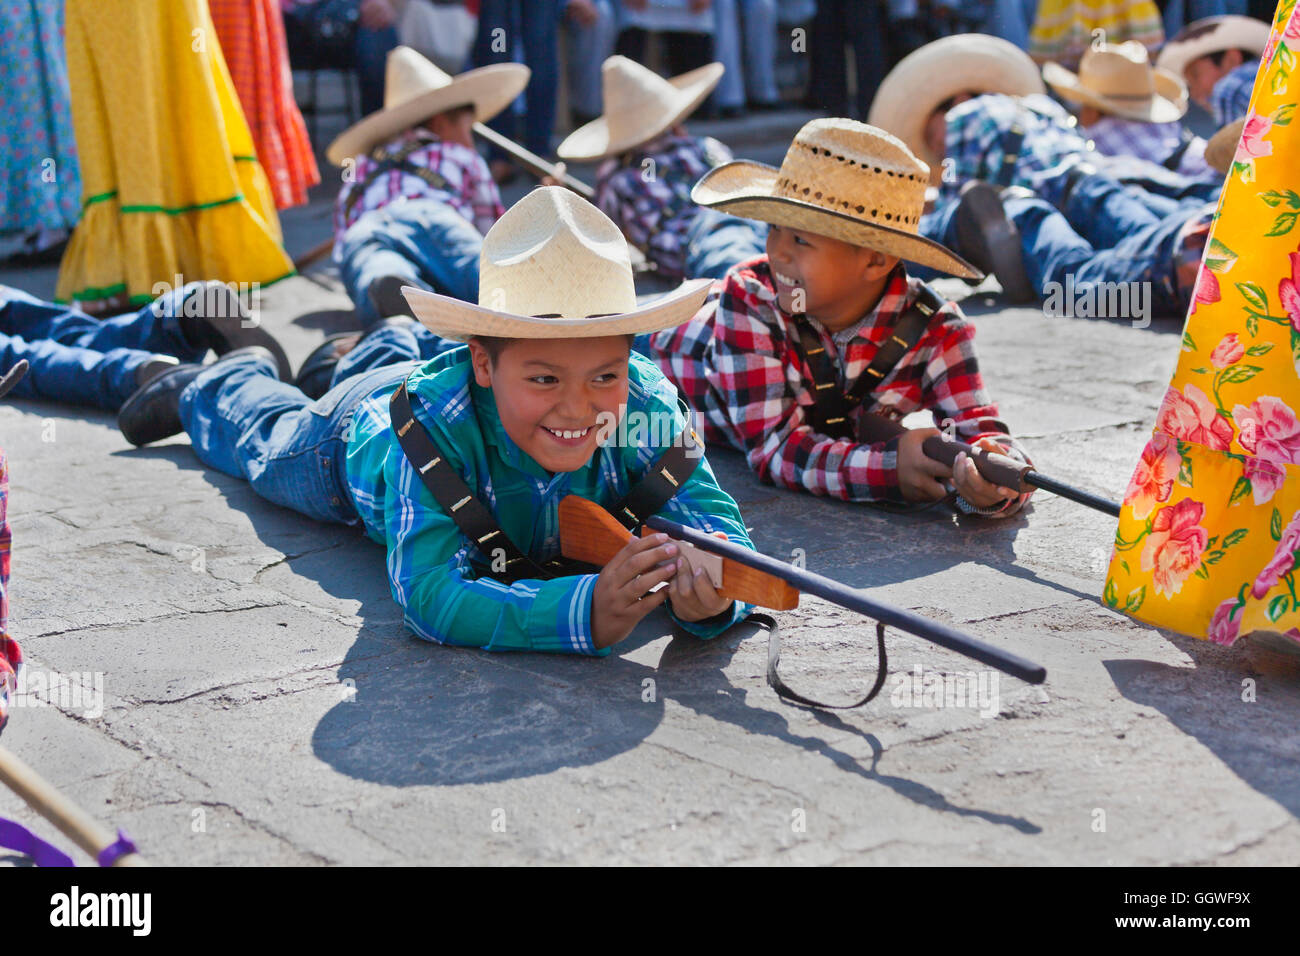 DAY OF THE REVOLUTION is celebrated with a parade on November 20th each year - SAN MIGUEL DE ALLENDE, MEXICO Stock Photo